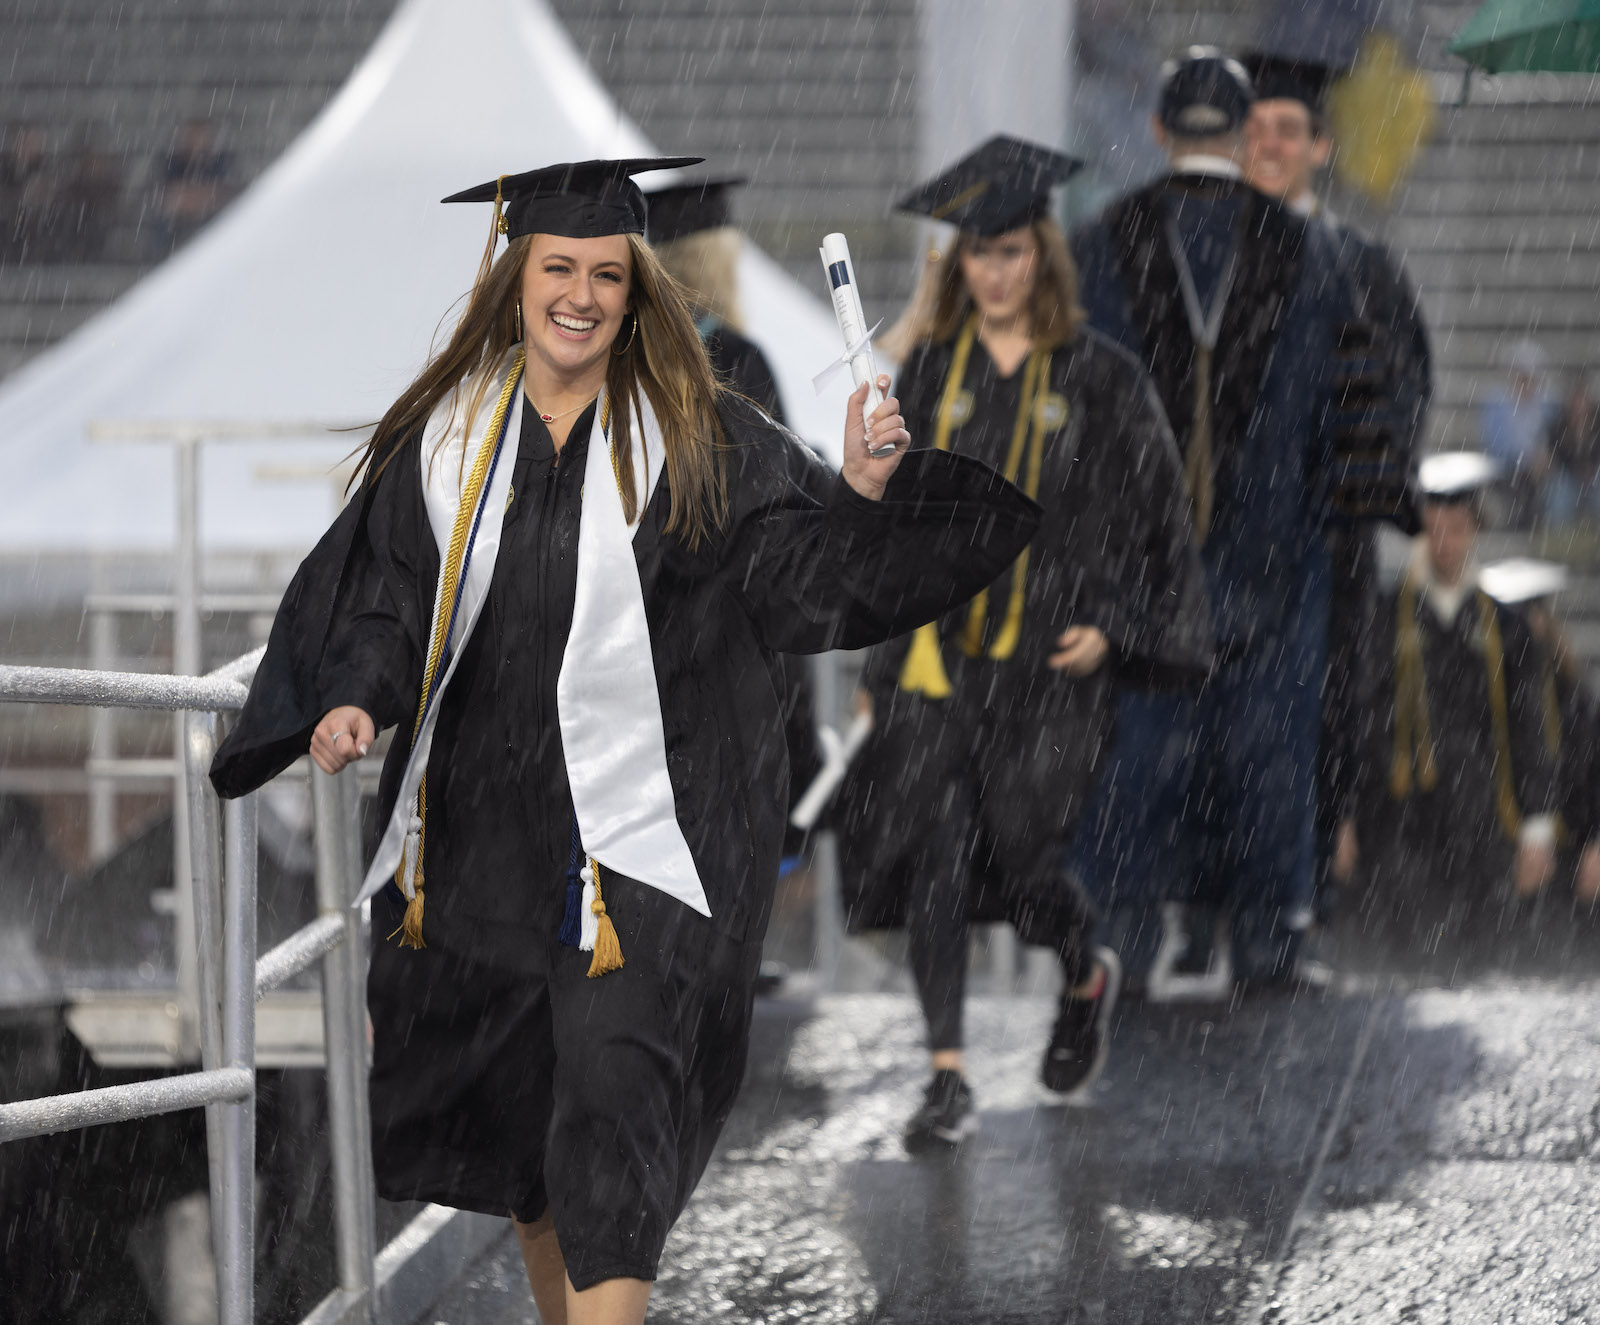 Woman holding diploma in the rain